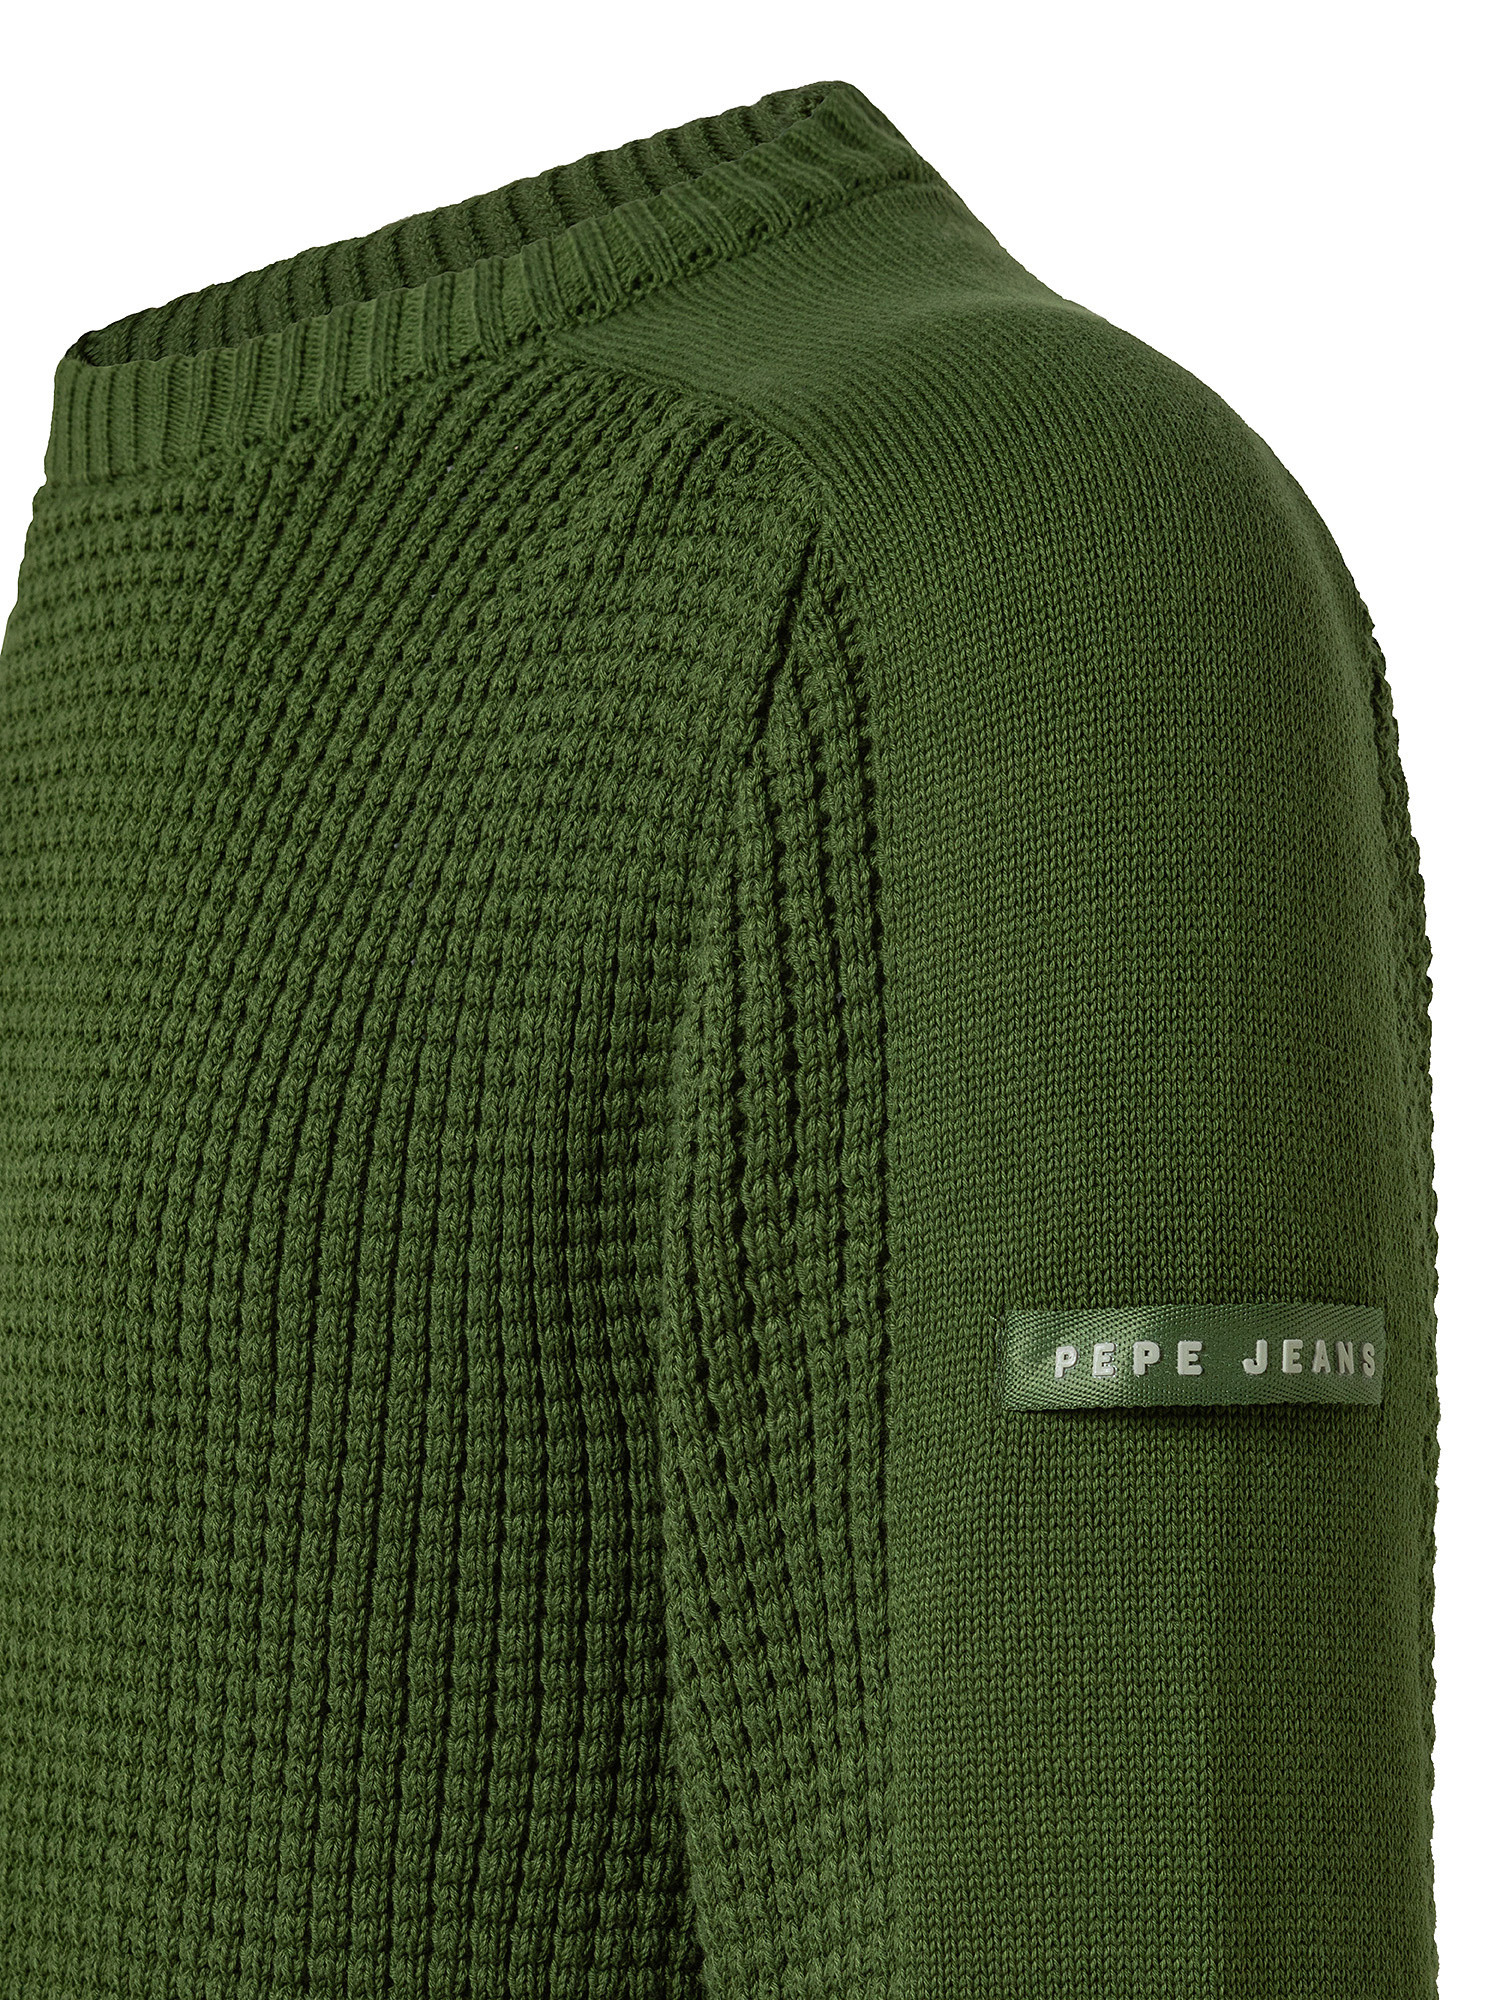 Moises contrast pullover, Dark Green, large image number 2